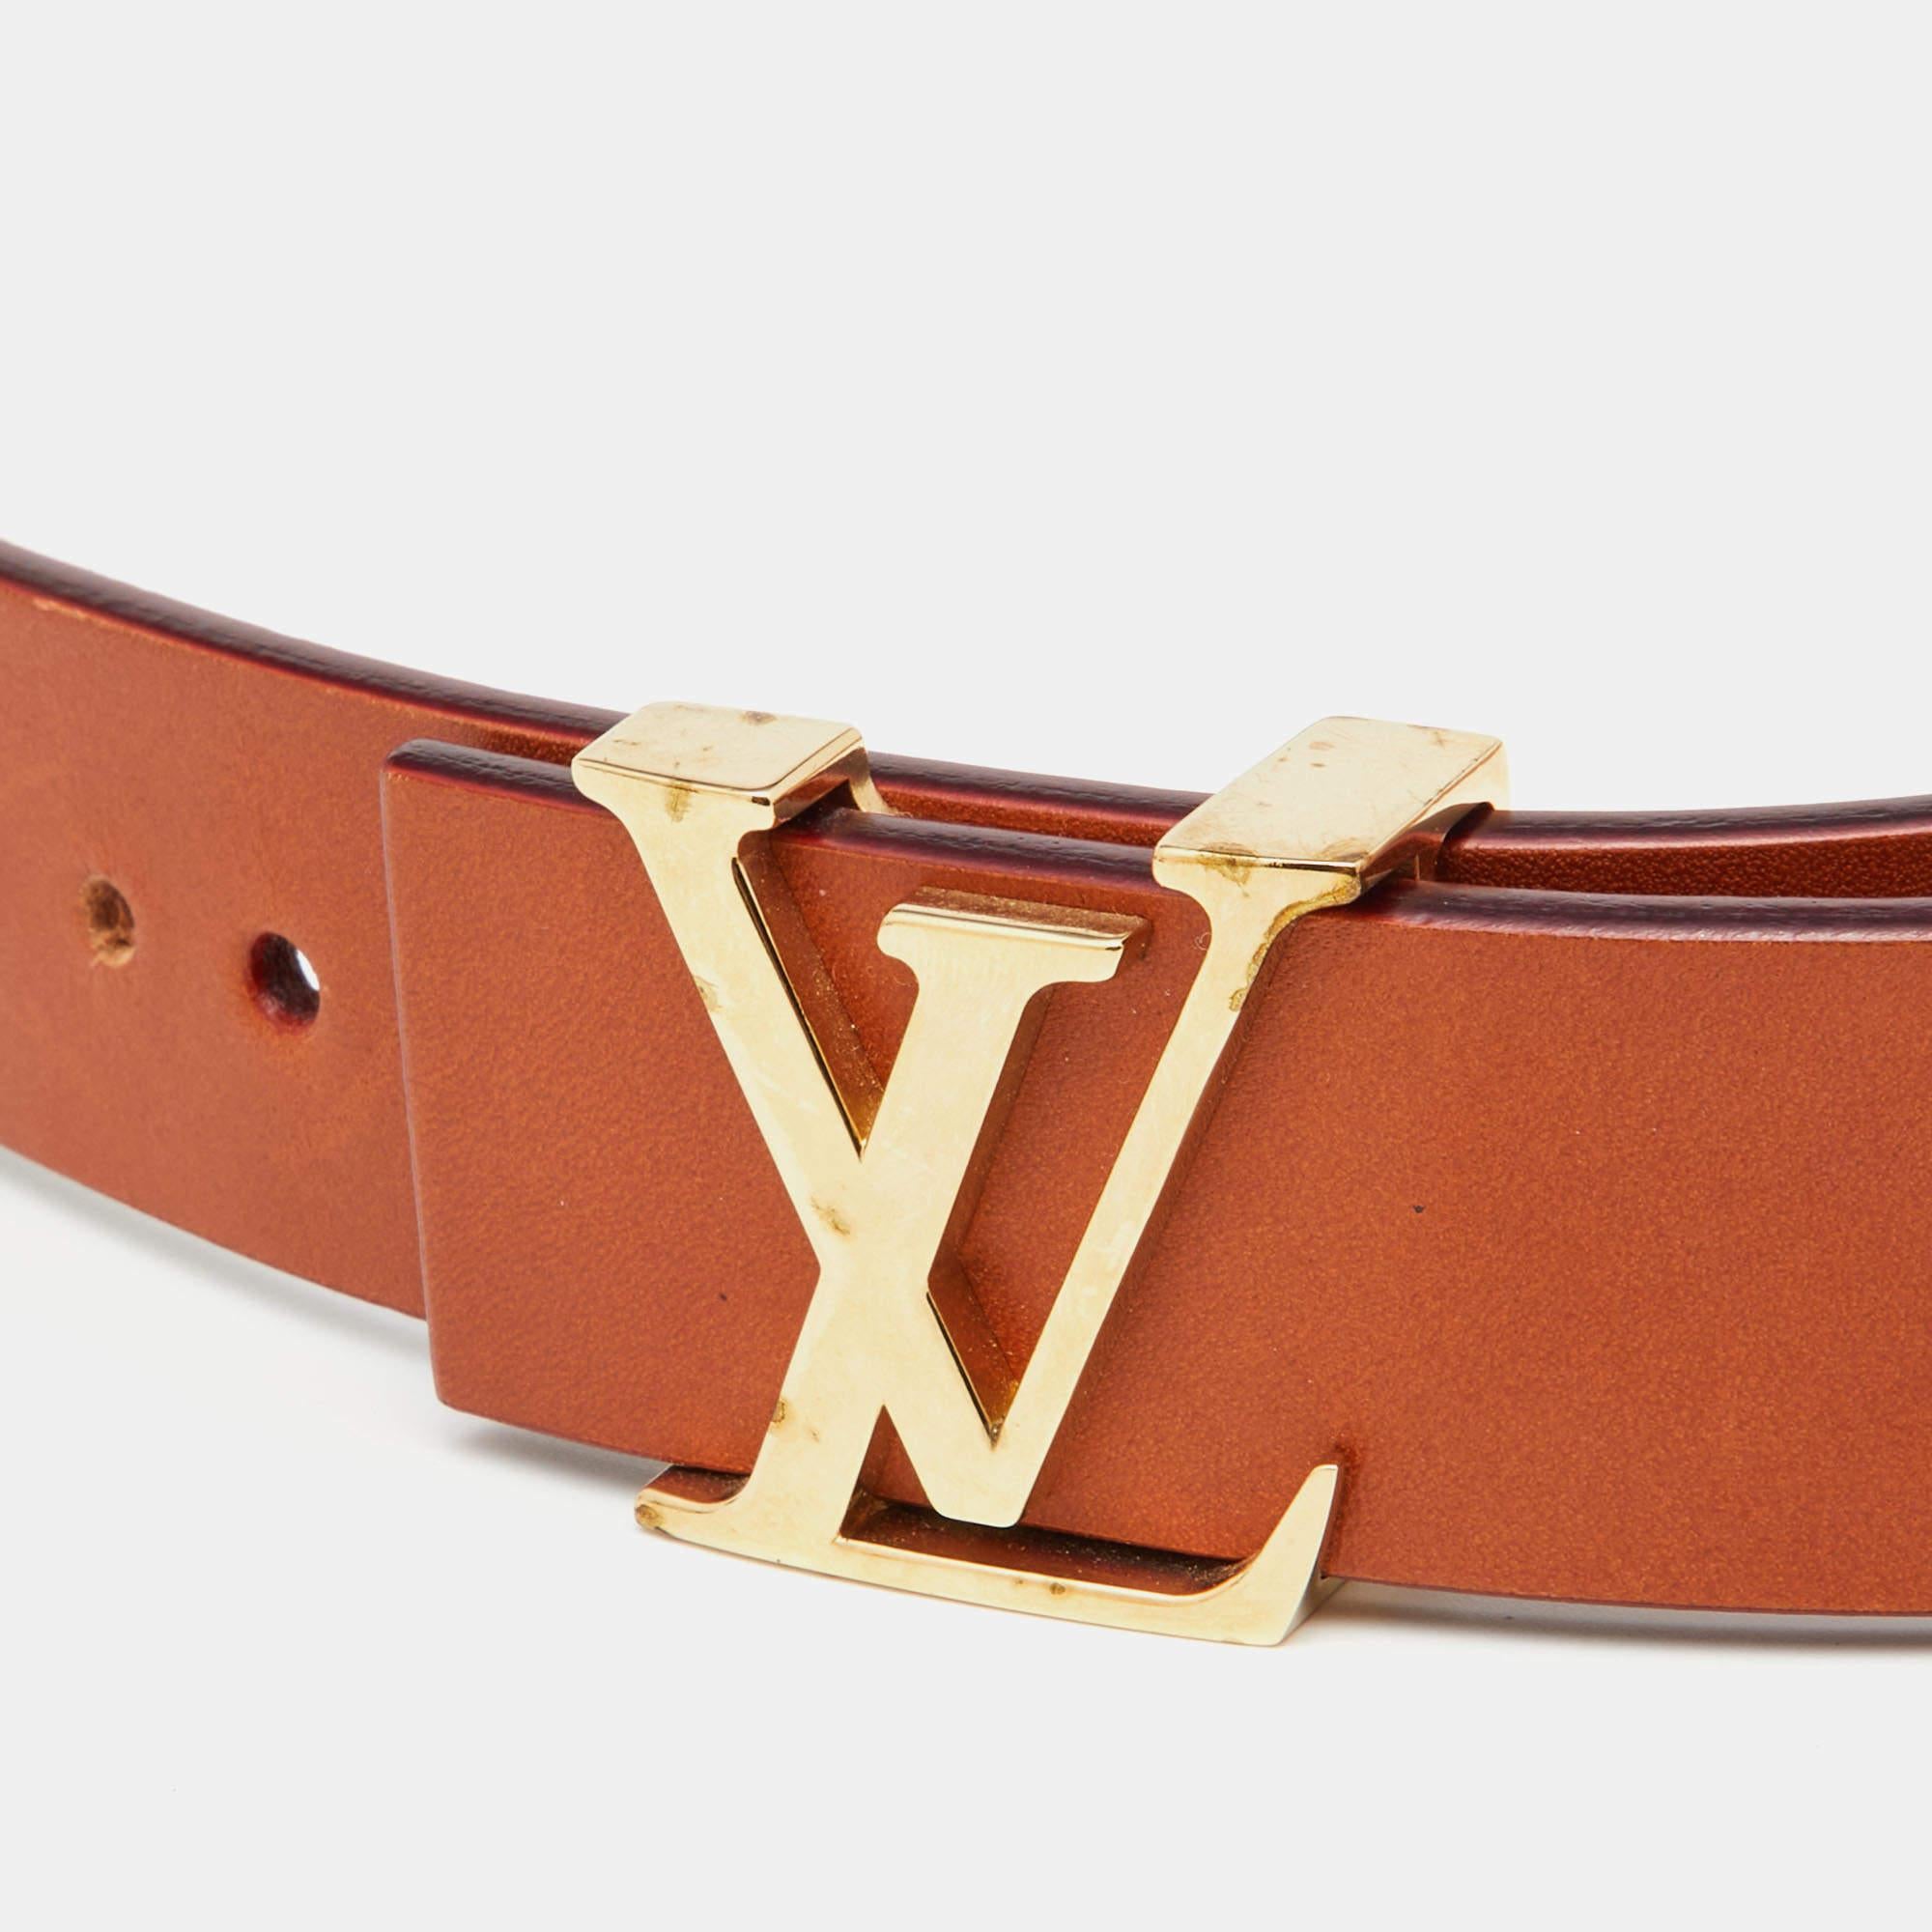 This Initiales belt from Louis Vuitton is simple in design but nevertheless quite appealing. The leather belt has gold-tone hardware in the form of the enlarged iconic LV symbol and the brand name is also engraved on the backside.

Includes: